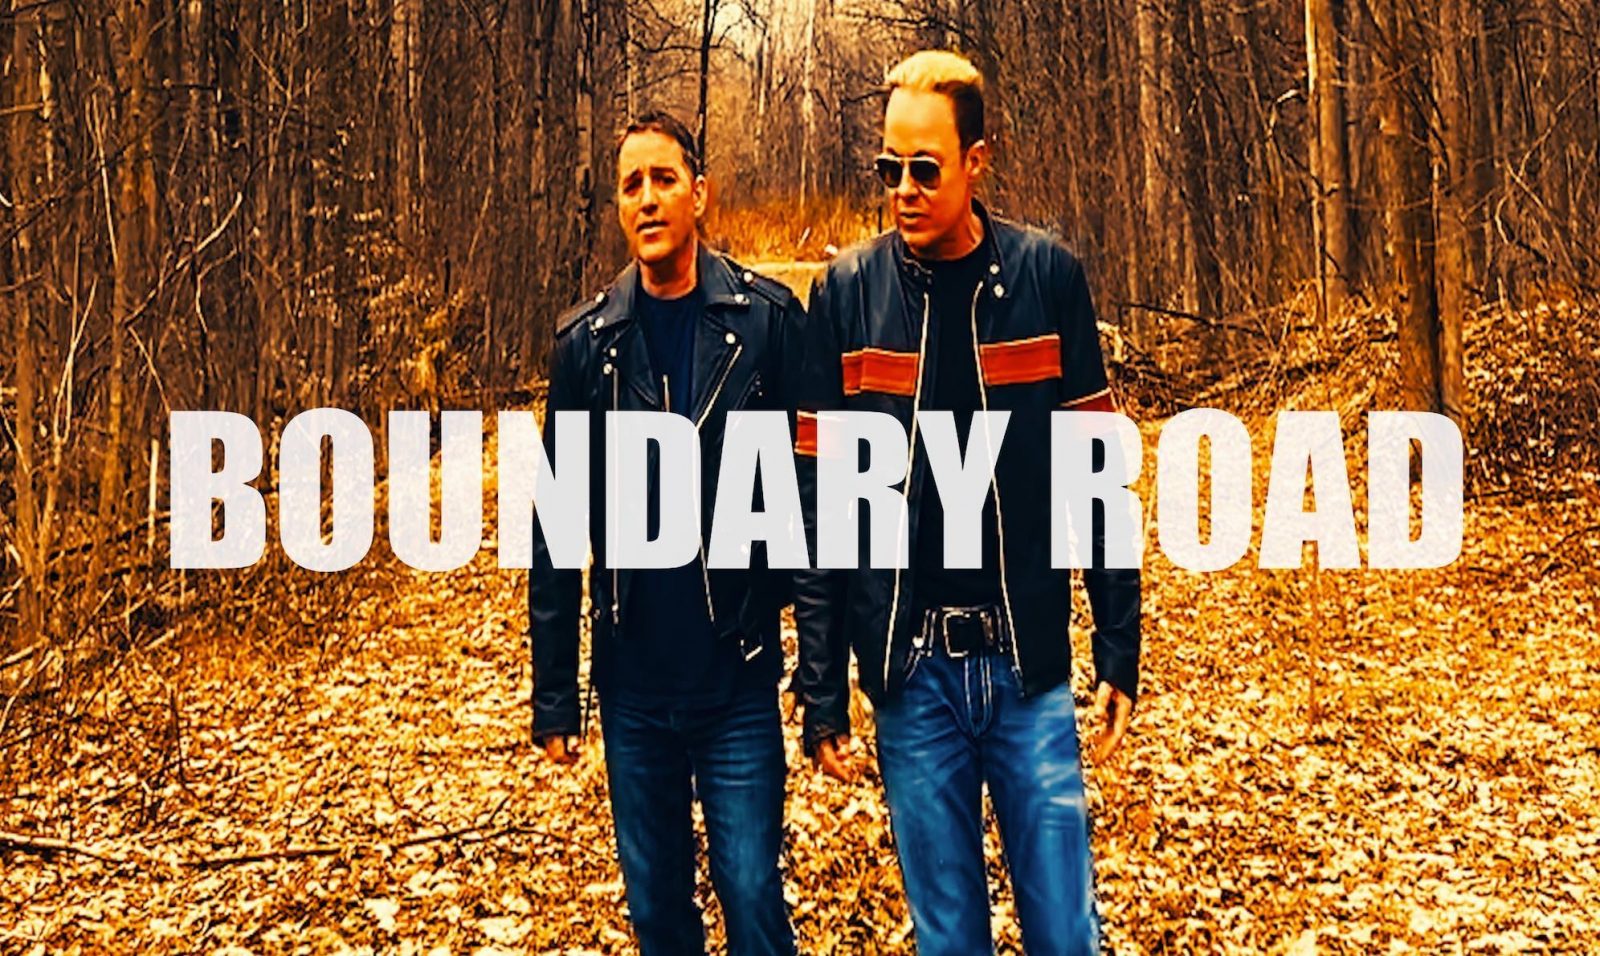 Local artist tried his hand at country music with new Boundary Road band